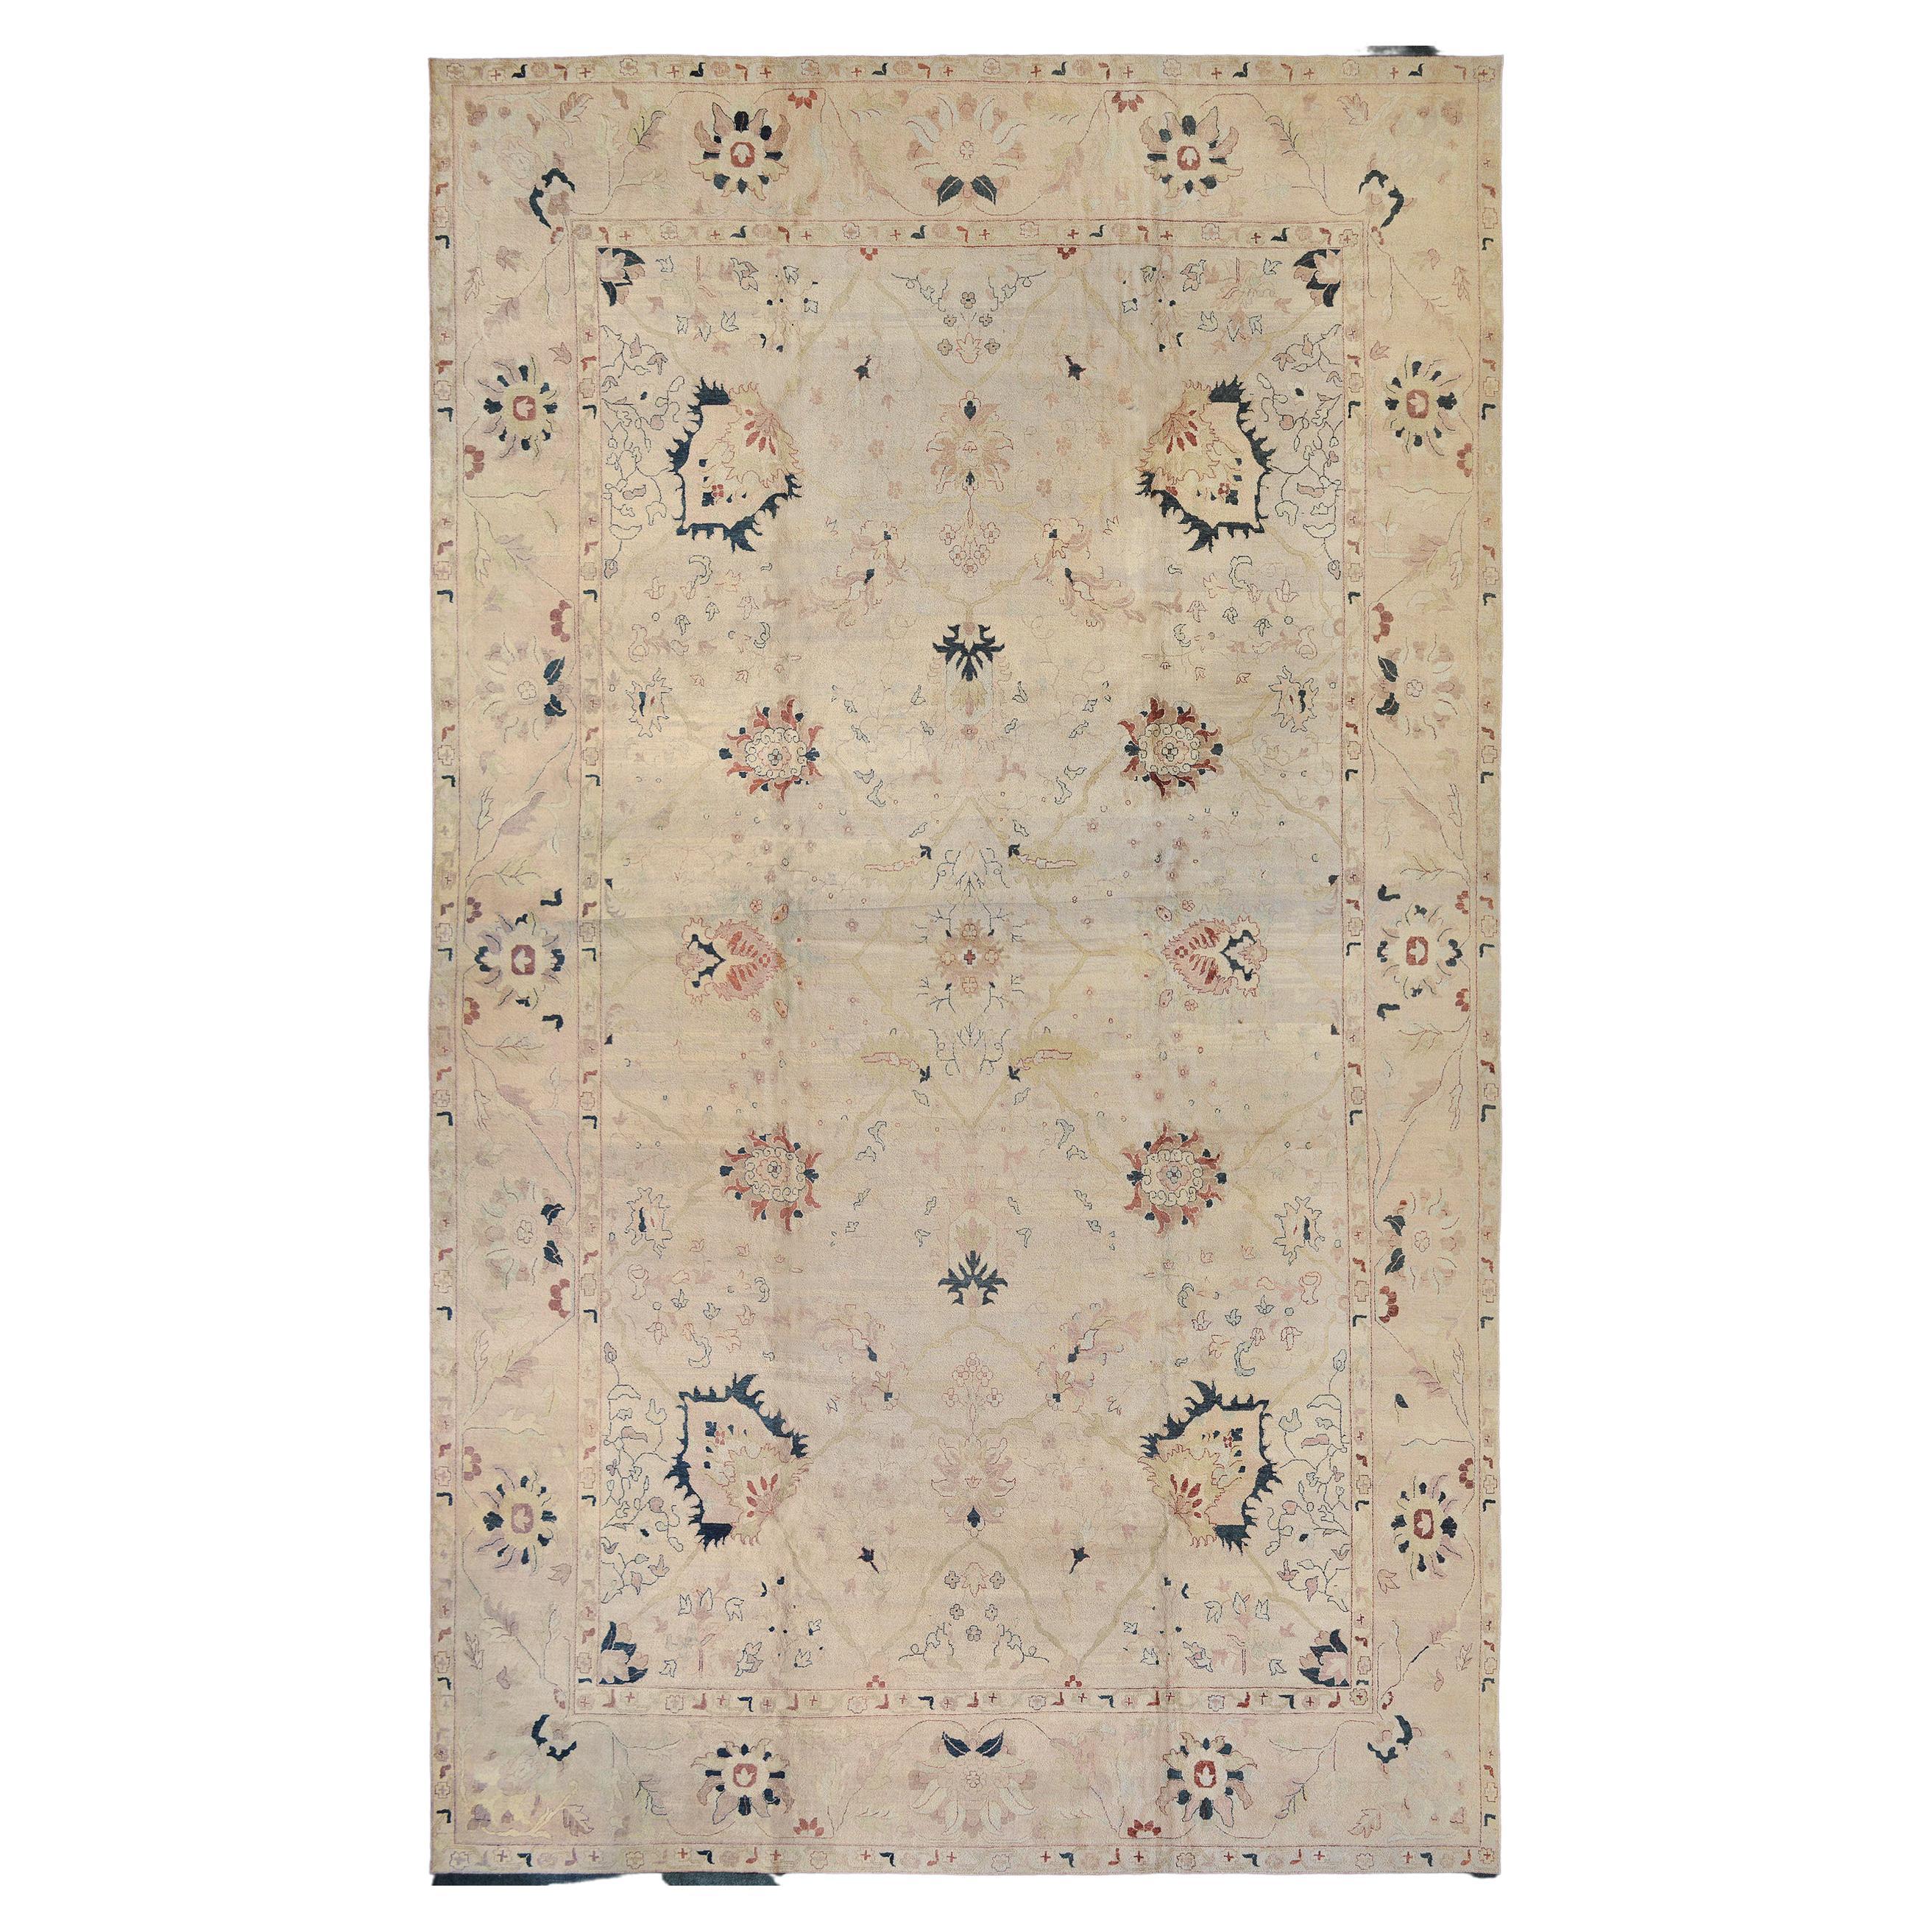 Large Size Handwoven Revival Agra Rug